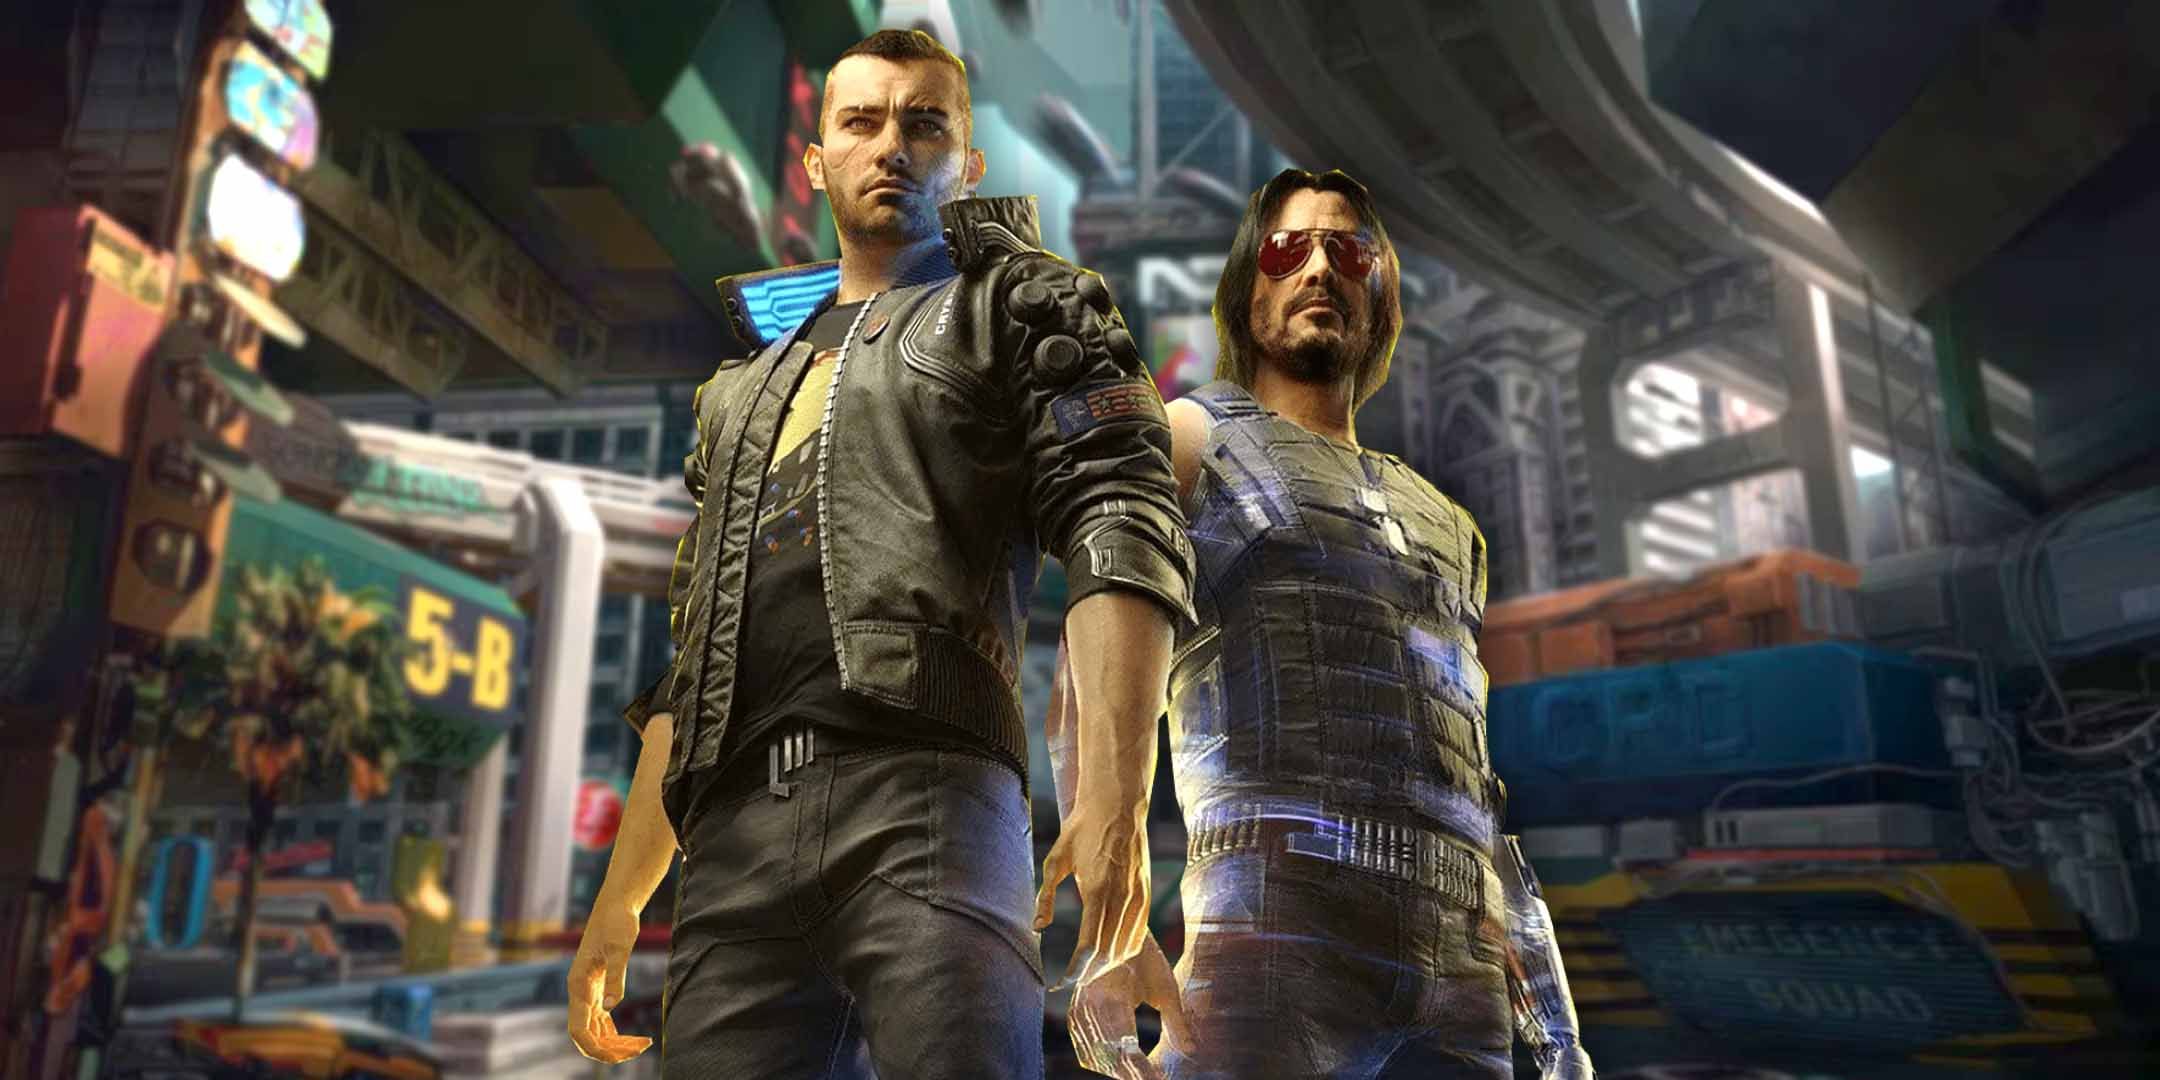 V and Johnny Silverhand in Cyberpunk 2077